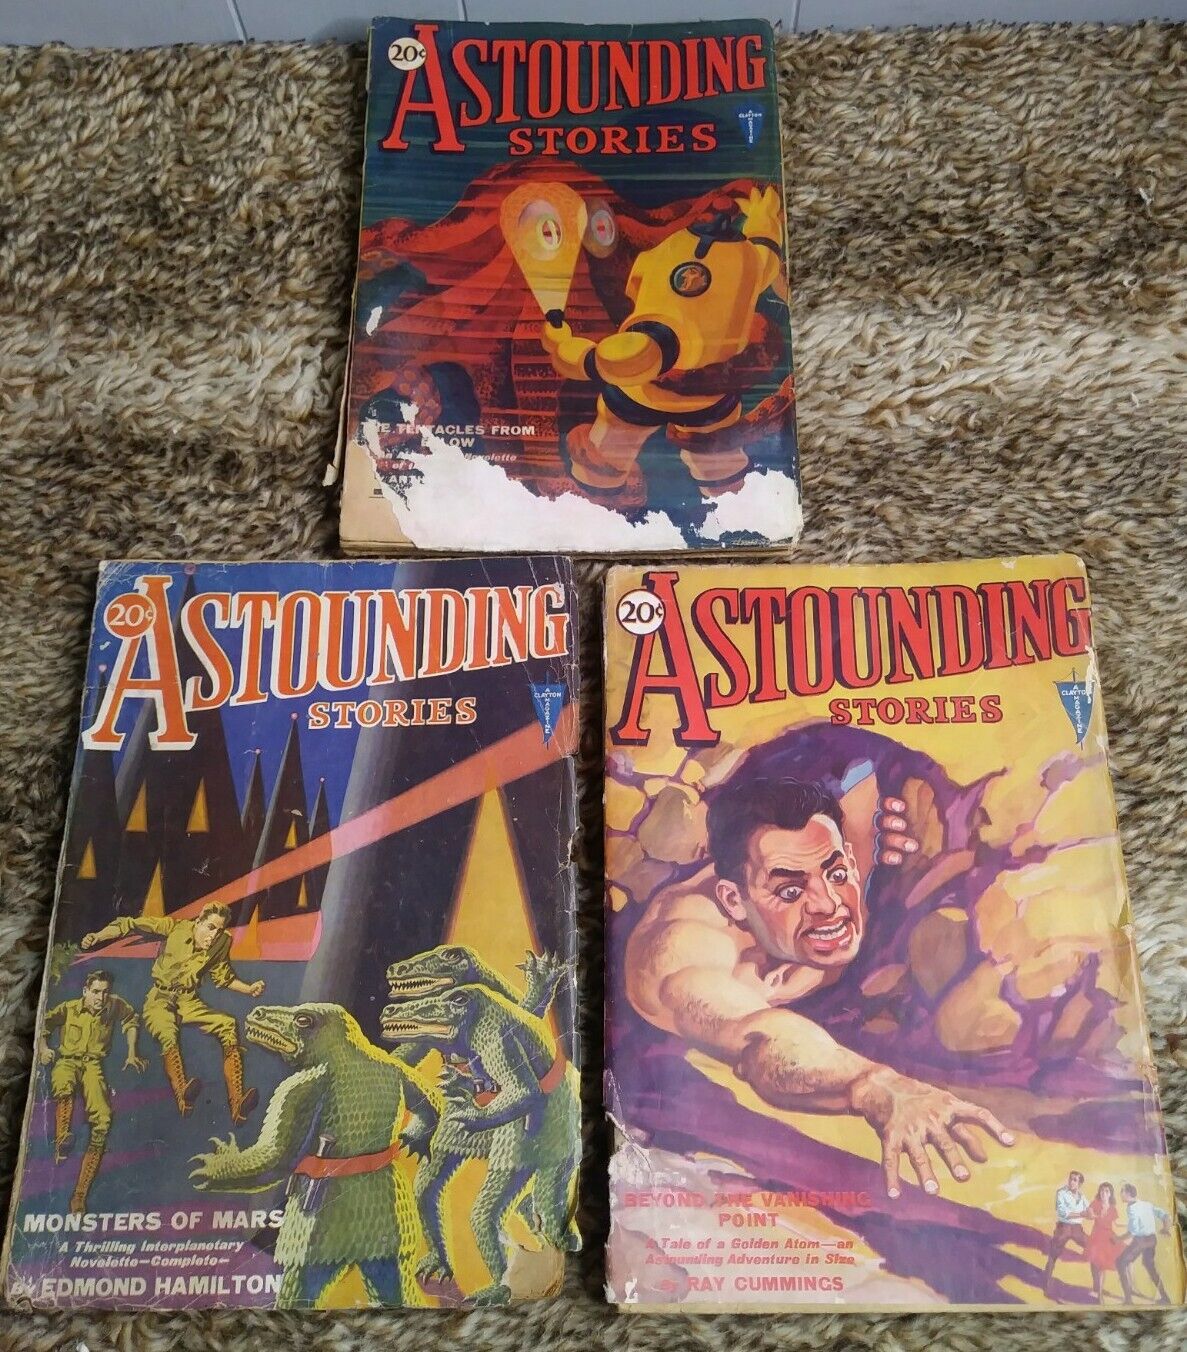 Vtg 1931 Astounding Stories Monsters of Mars, The Tentacles from Below Magazines